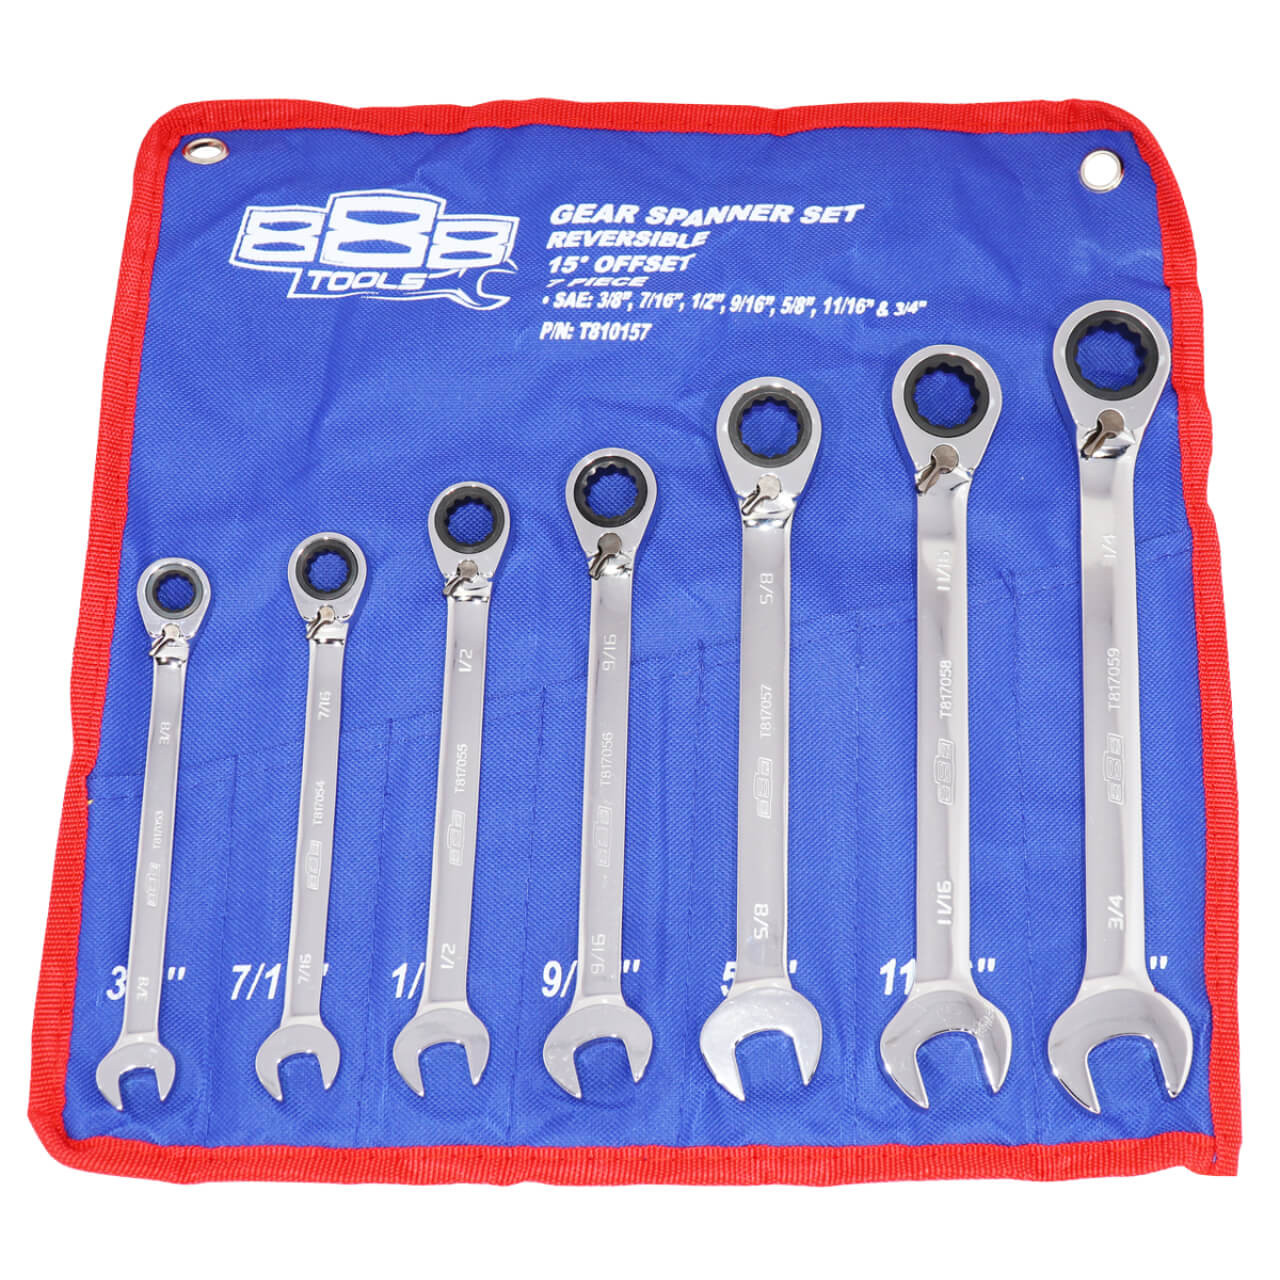 888 Tools 3/8-3/4 Combination ROE Reversible Gear Spanner Set SAE 7pce